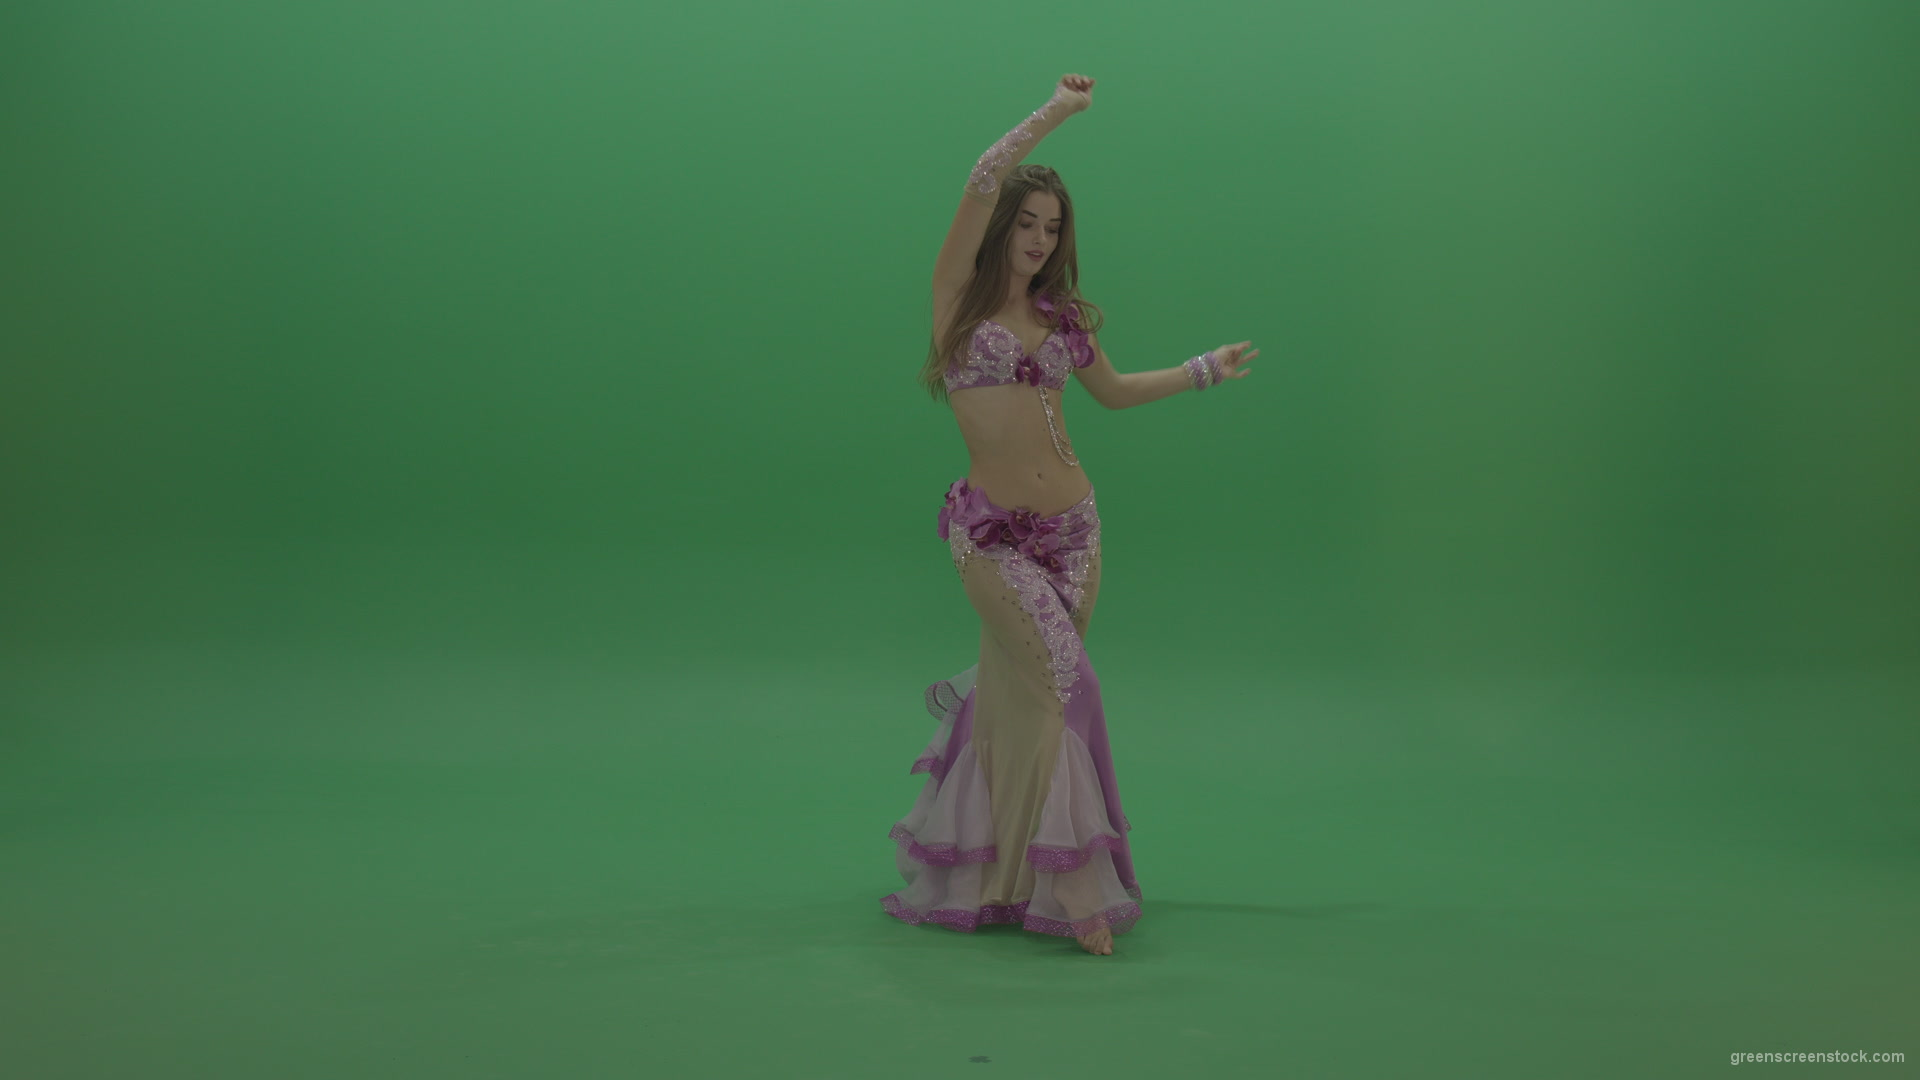 Beautiful-belly-dancer-display-amazing-dance-moves-over-chromakey-background_002 Green Screen Stock